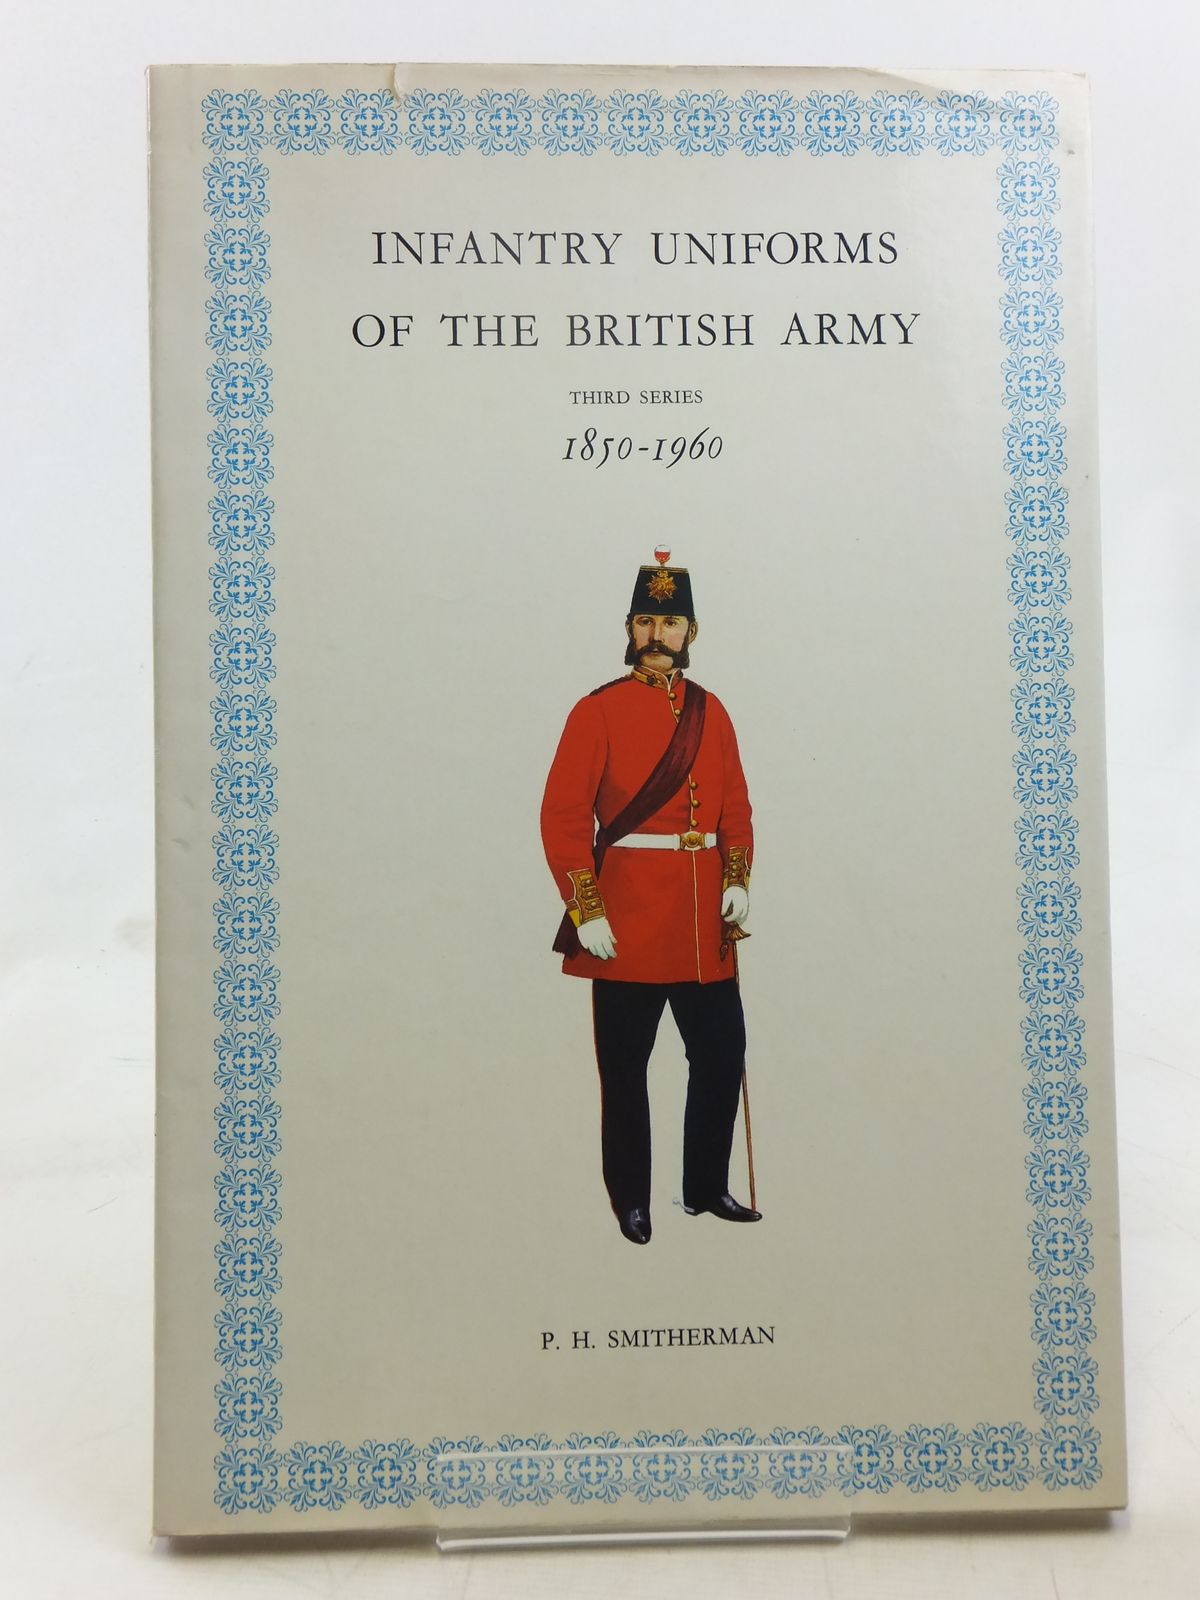 [PDF] Uniforms Equipment Of The British Army - Free Download and Read Ebook